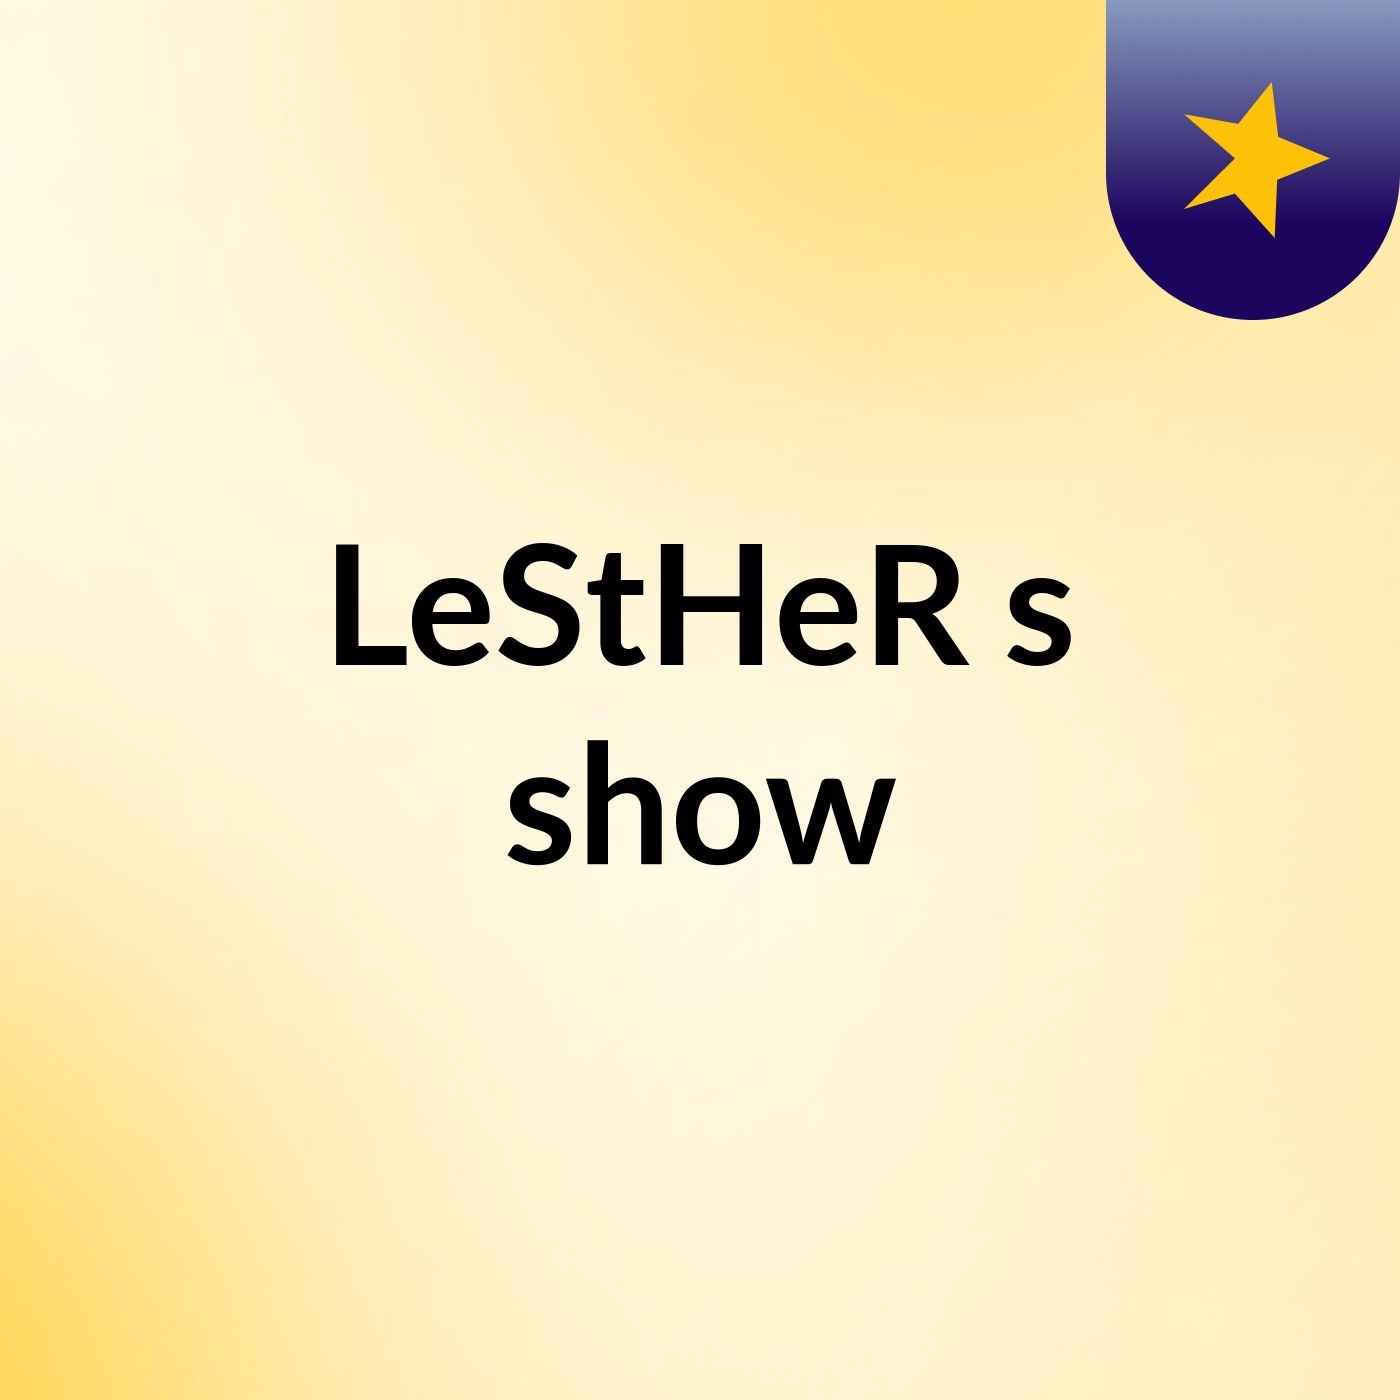 LeStHeR's show